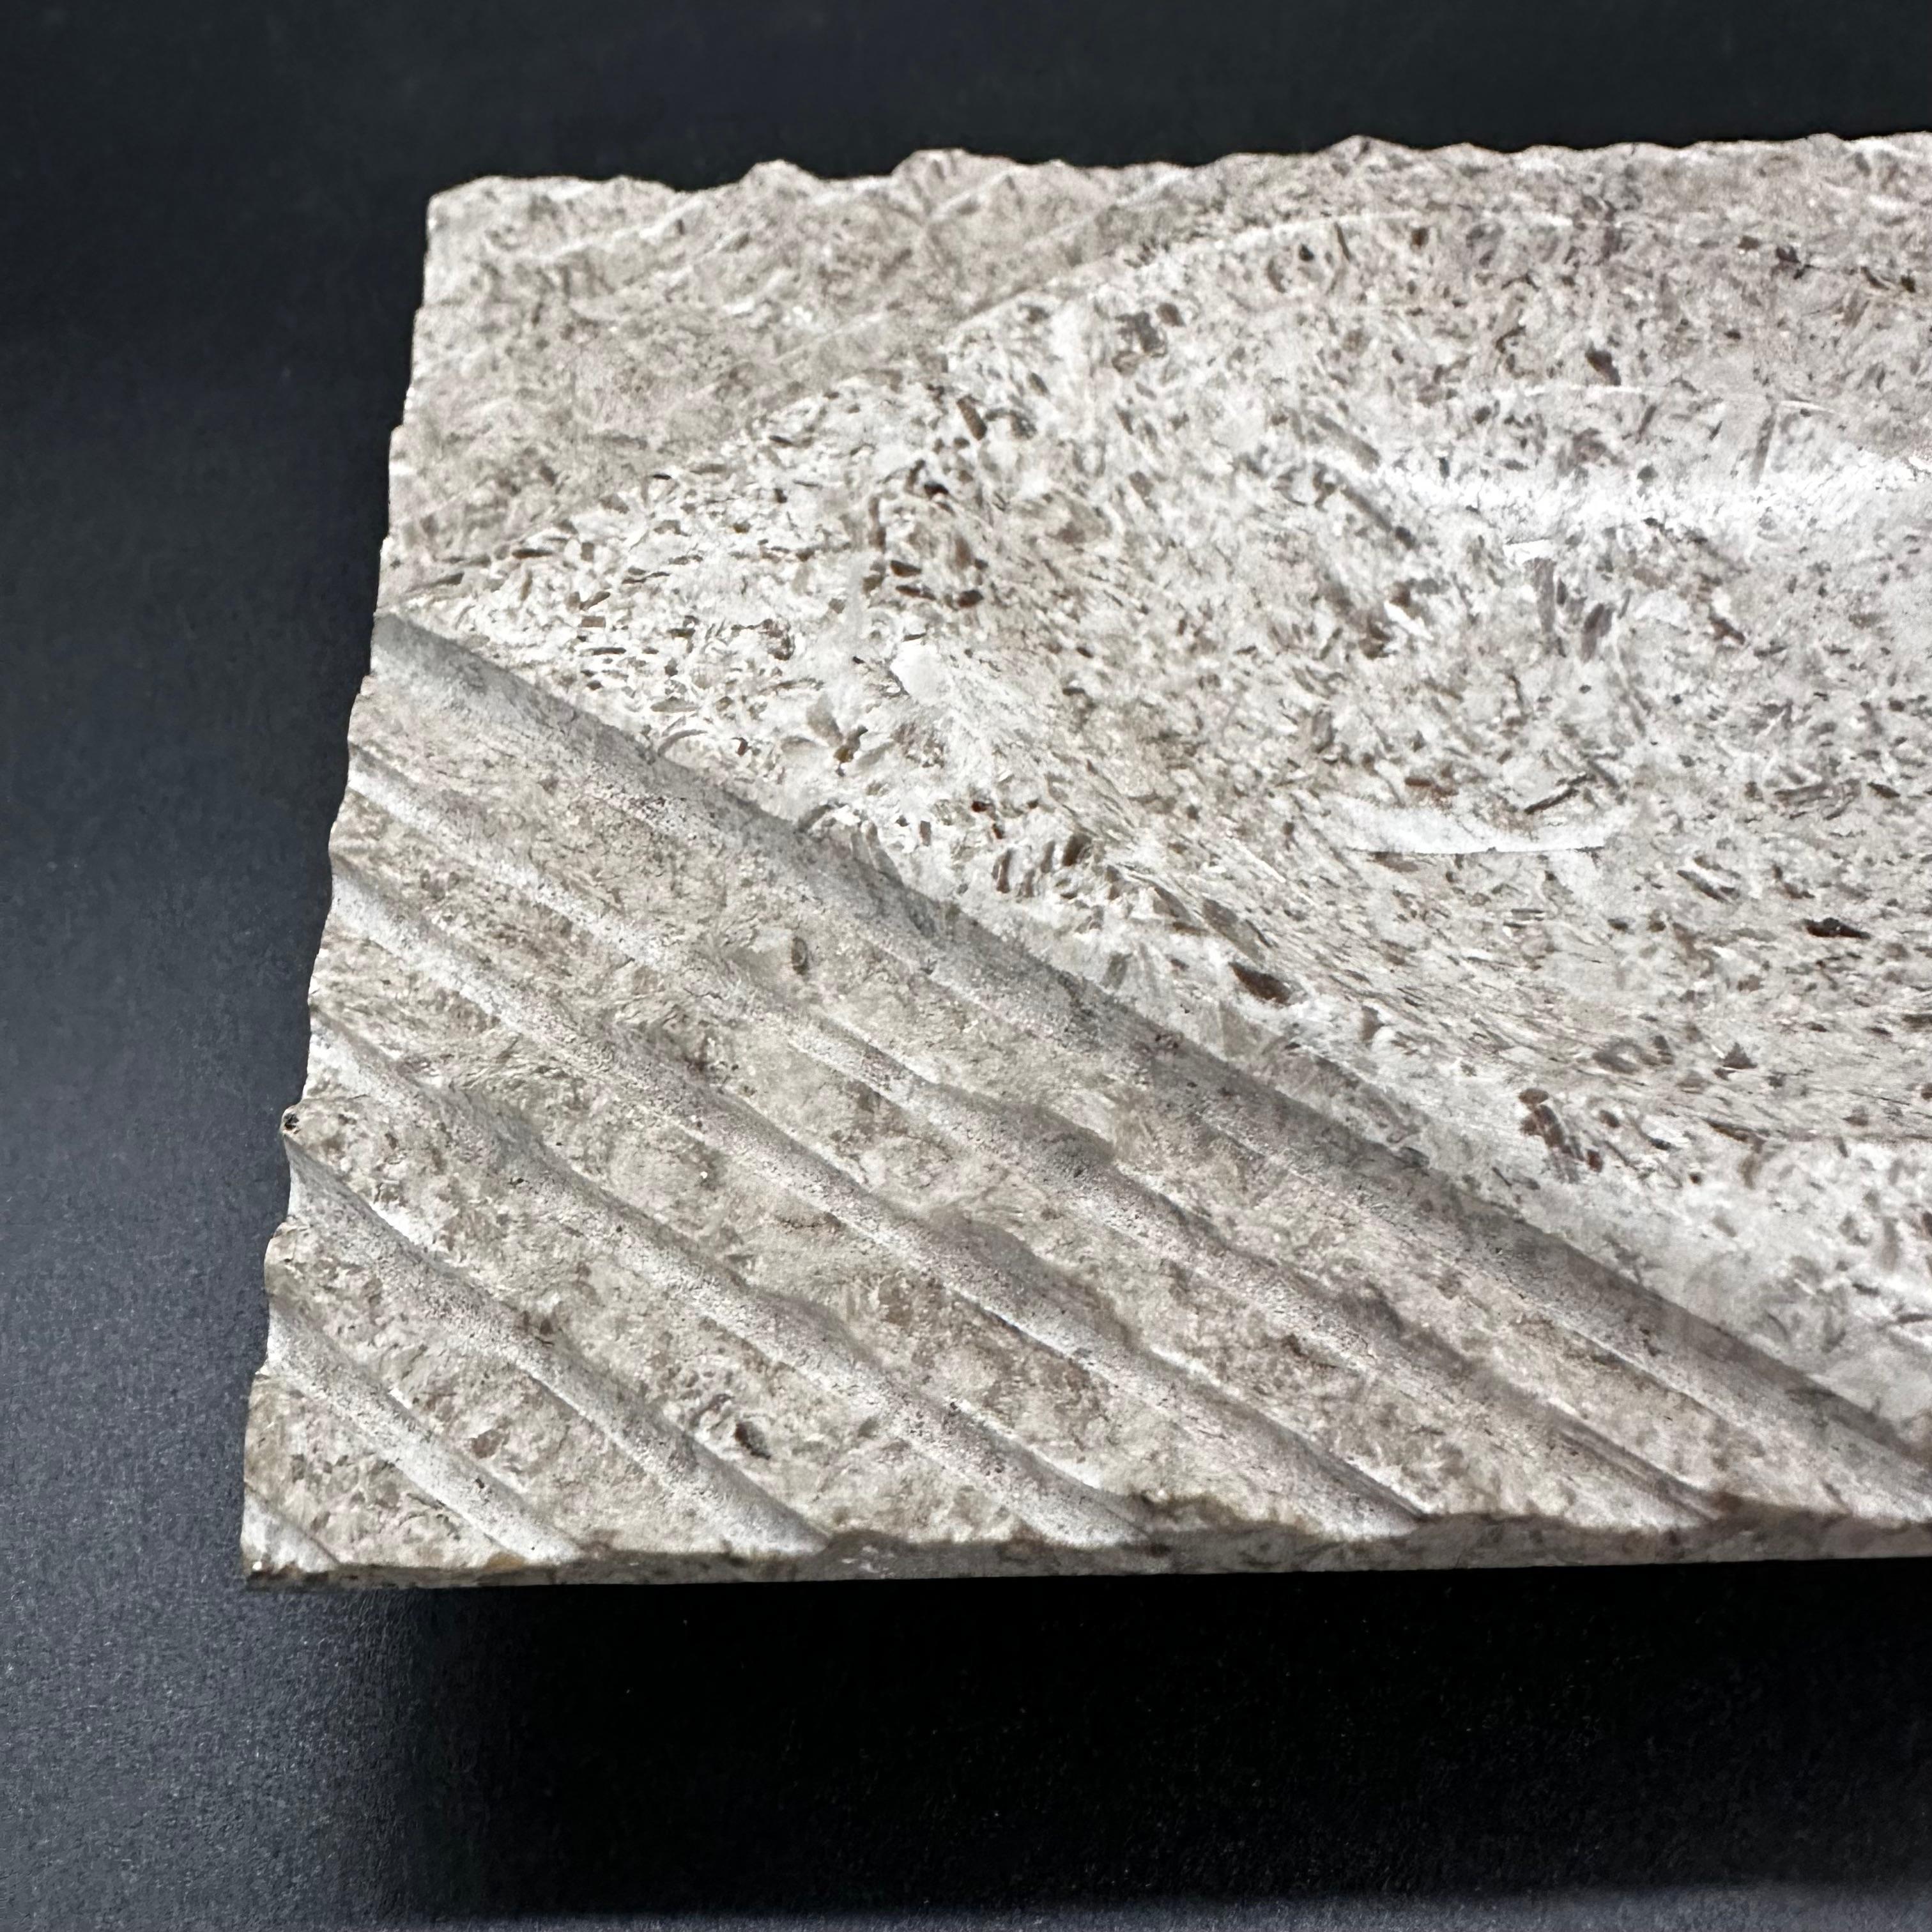 A vintage Italian marble ashtray from the 1960s typically features elegant, sleek lines and exquisite craftsmanship. Made from high-quality marble, it showcases the beauty of natural stone with its unique veining and polished finish.

